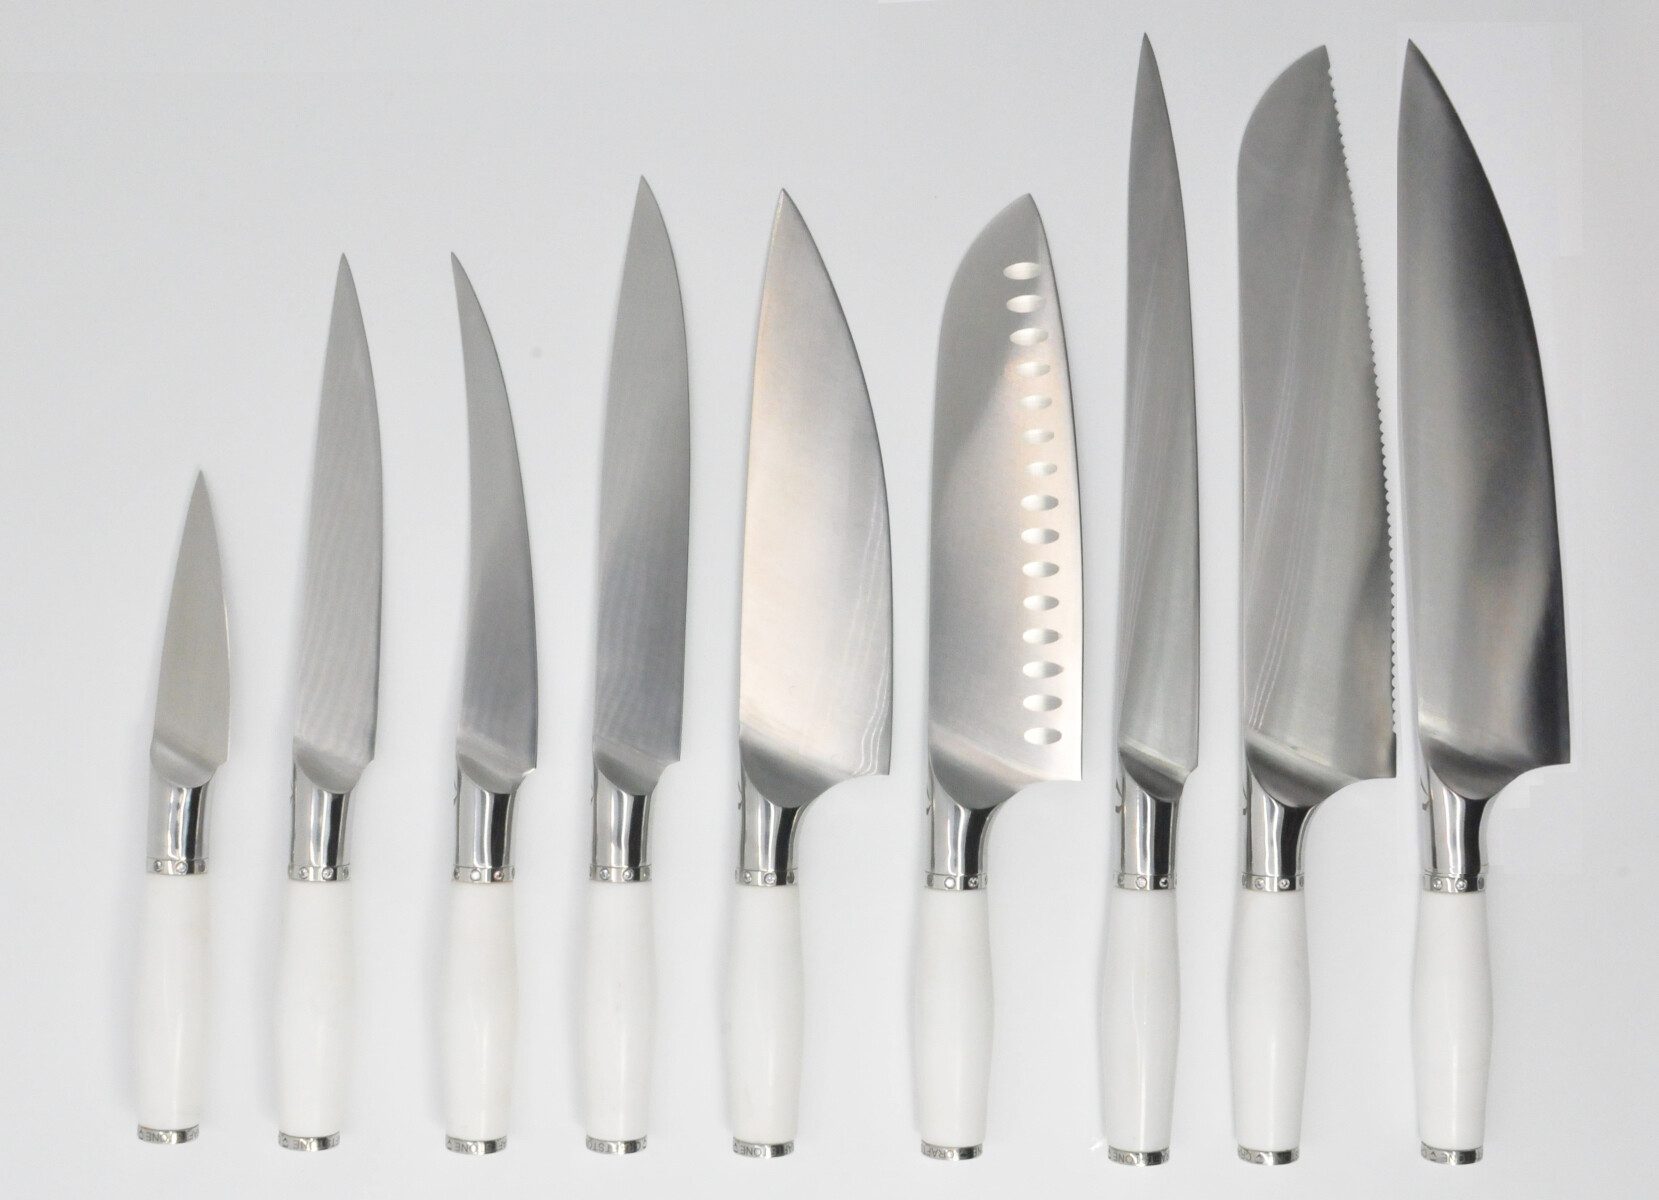 https://www.craftstoneknives.com/wp-content/uploads/bfi_thumb/9-Knife-Set-with-a-Calcutta-White-Marble-Handle-White-Cubic-Zirconia-Stone-at-the-Back-of-the-Knife-White-Cubic-Zirconia-8-Gemstones-Stainless-Steel-Ring-2-3jbcc25dsy55a0vtb2rr4a.jpg